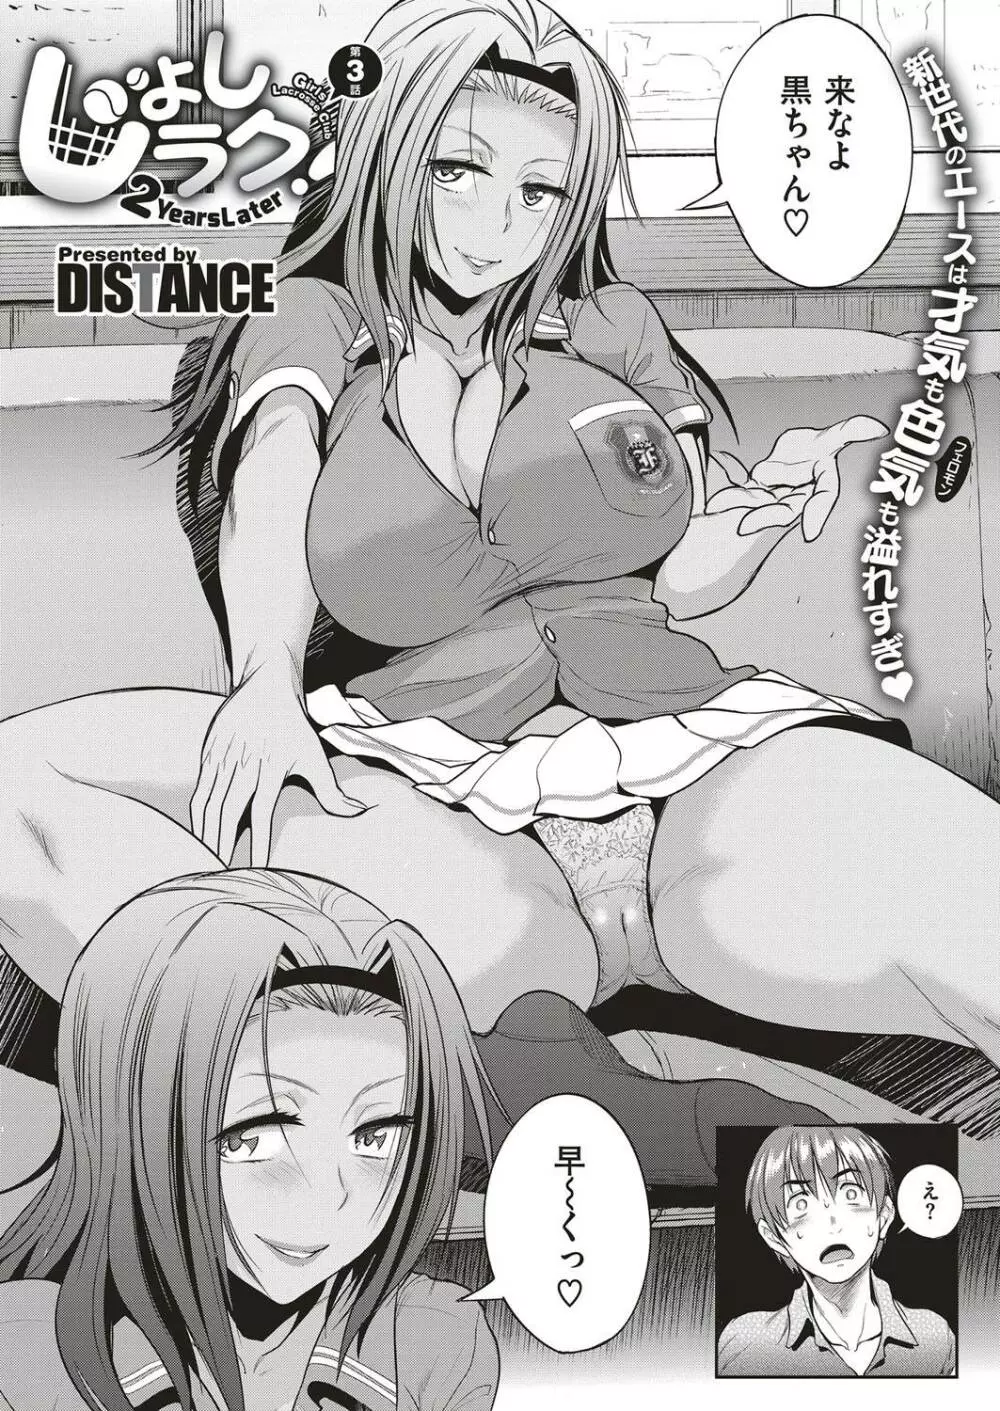 DISTANCE-Joshi Lacu! - Girls Lacrosse Club ~2 Years Later~ Ch.4 [Japanese] Page.2